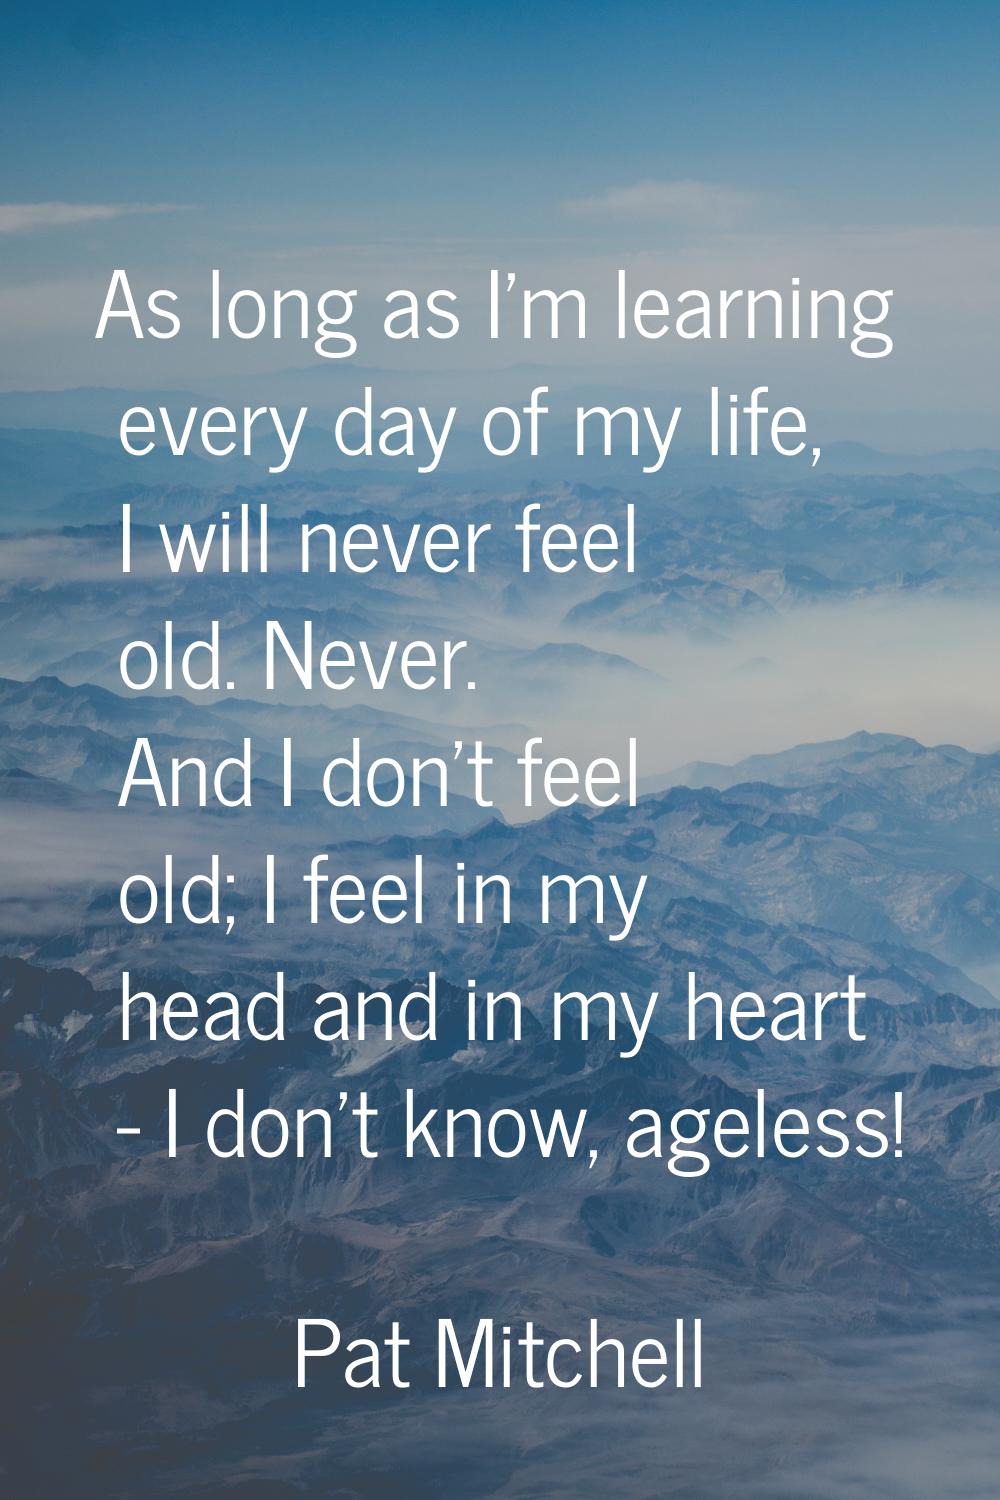 As long as I'm learning every day of my life, I will never feel old. Never. And I don't feel old; I